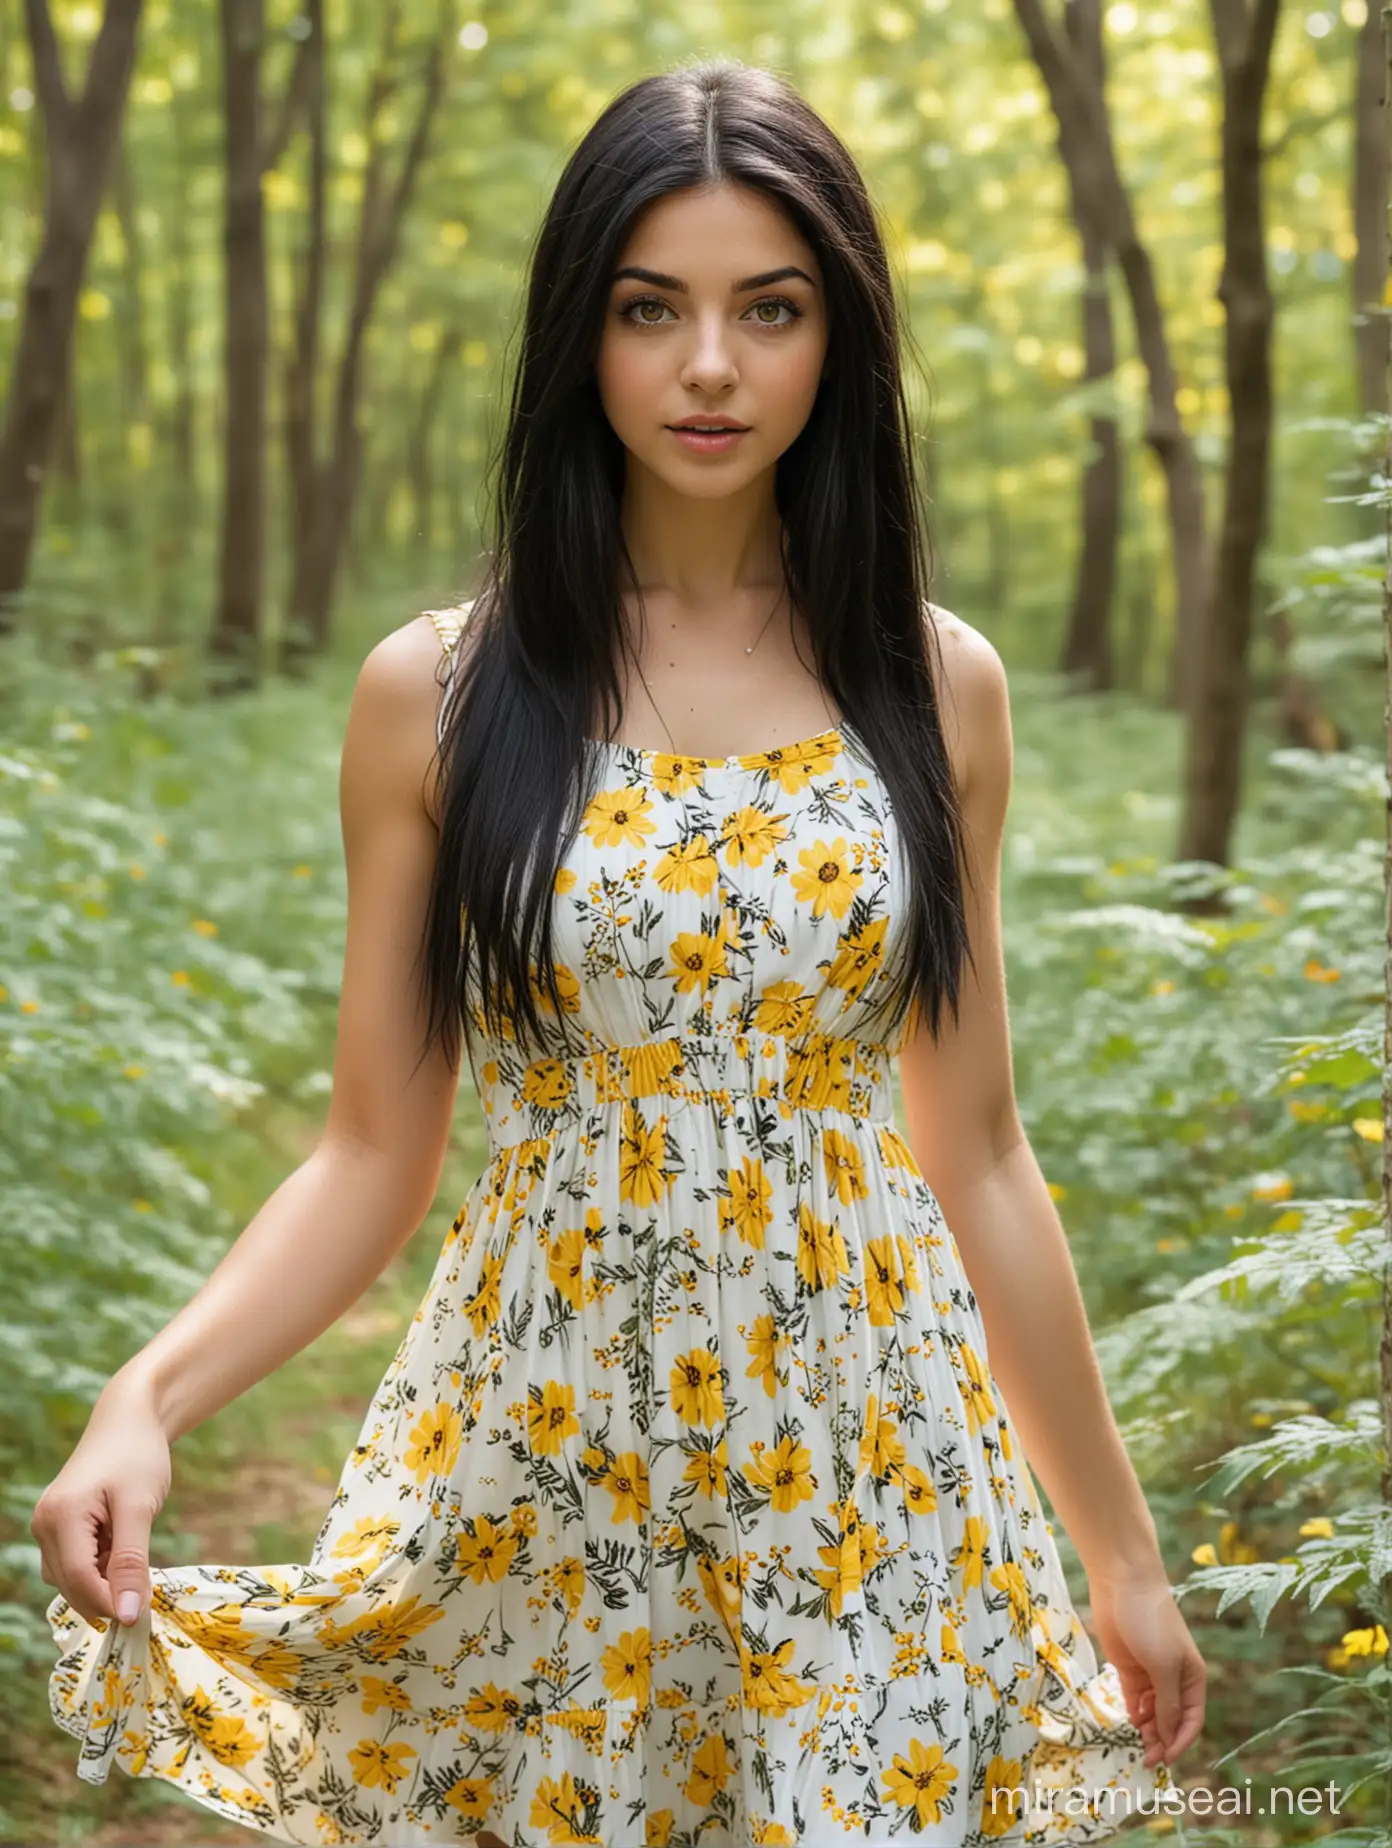 Enchanting Forest Scene with a Young Girl in a Sunlit Meadow